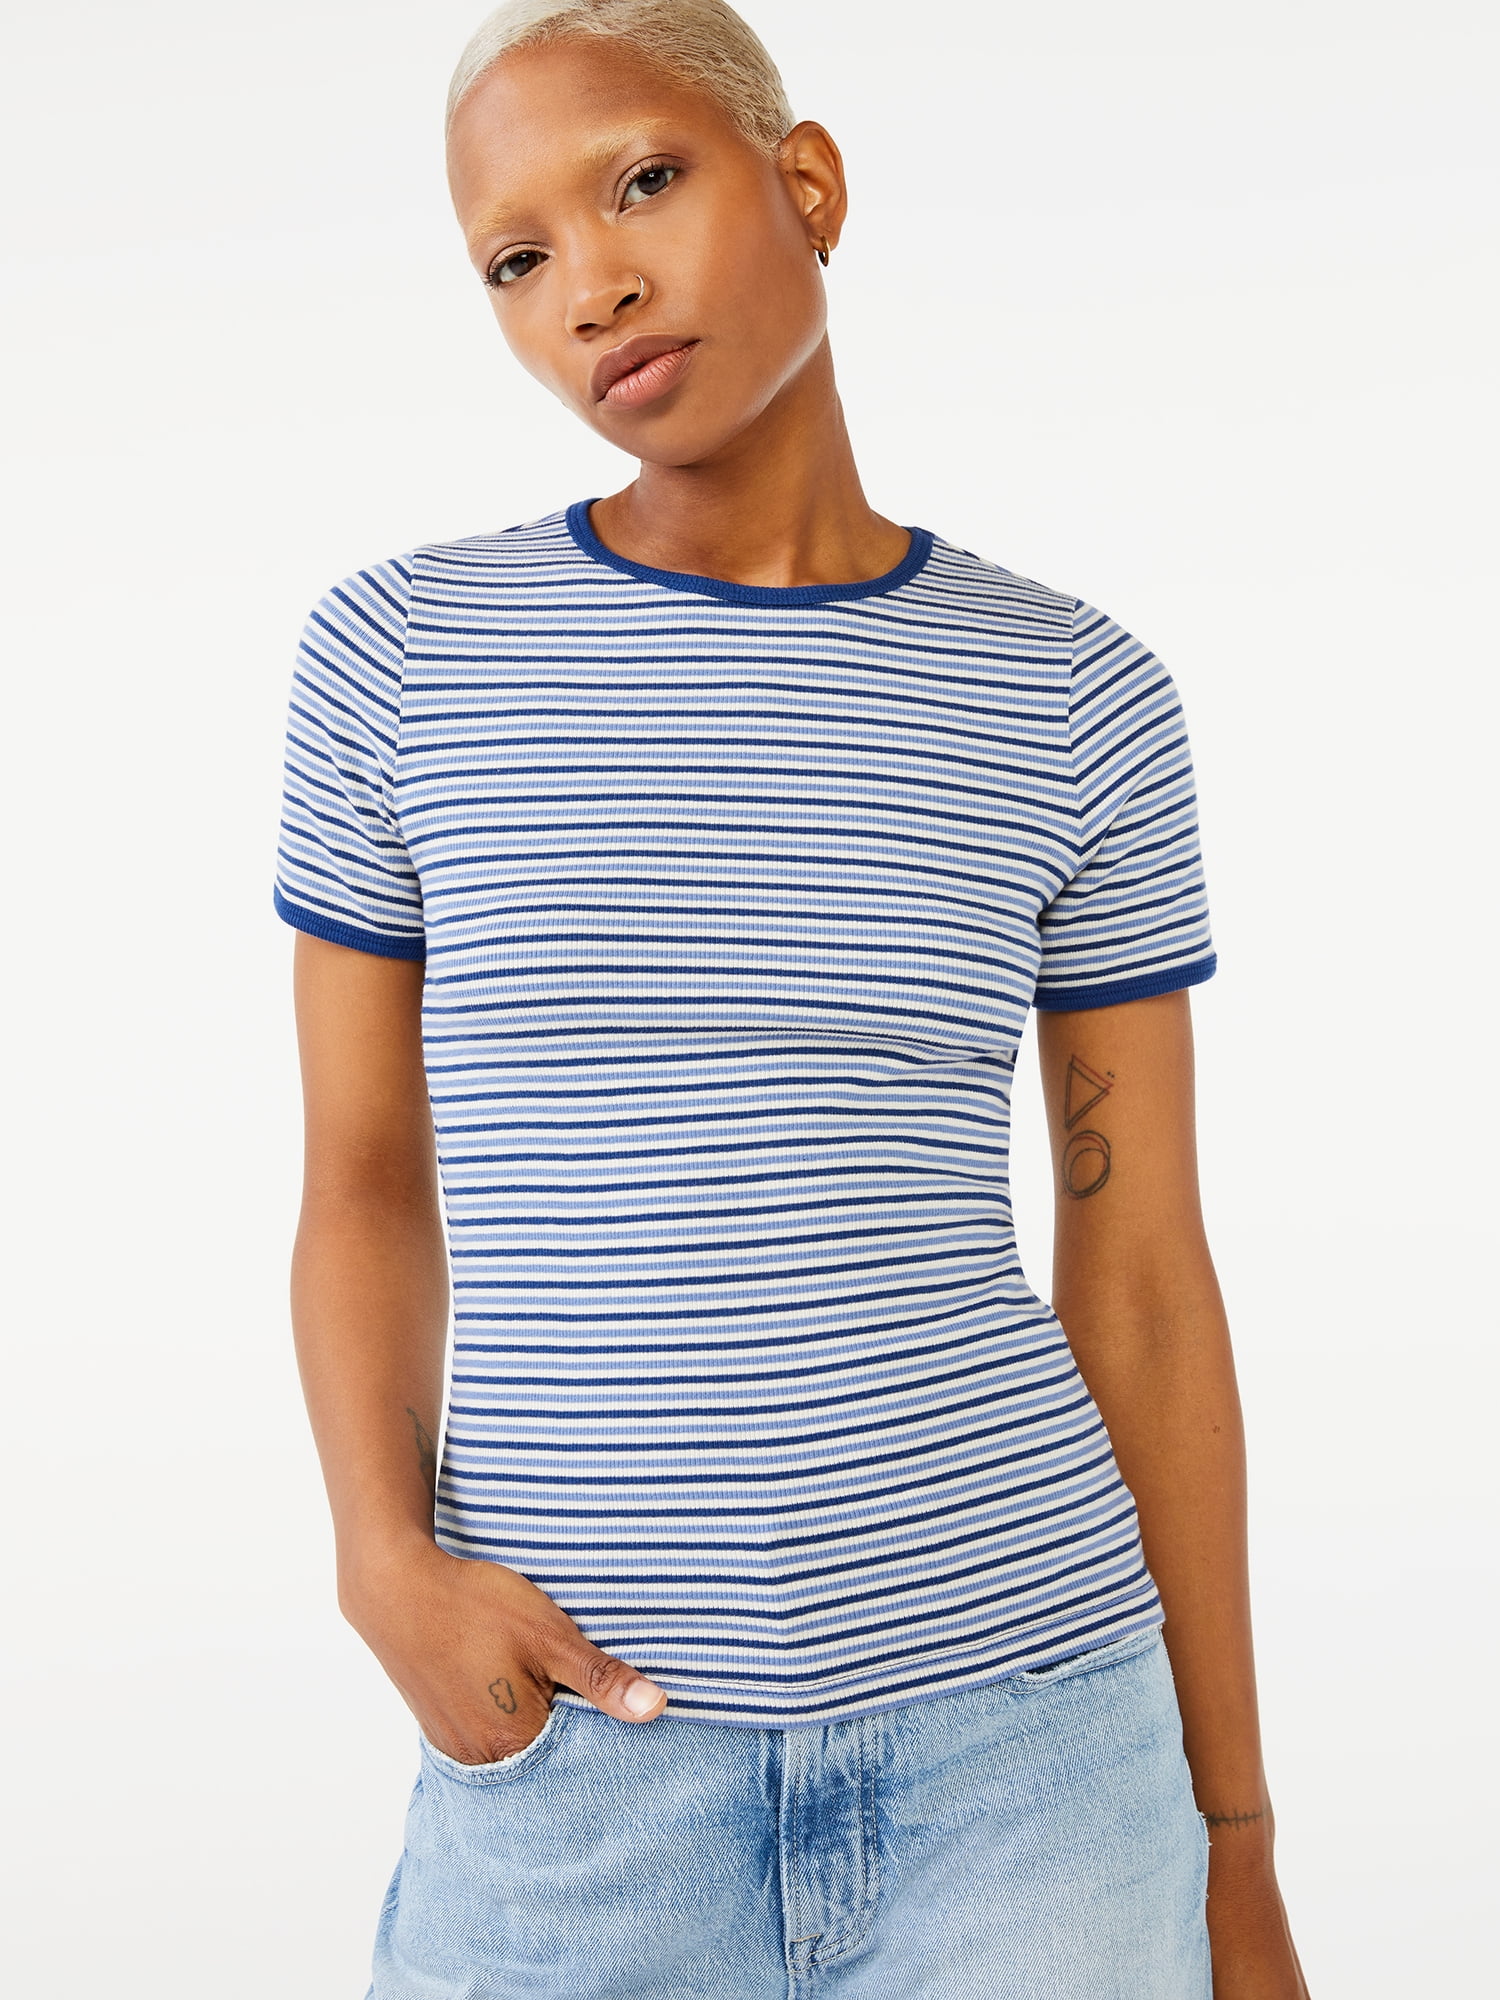 Free Assembly Women's Ribbed Crewneck Tee with Short Sleeves, Sizes XS ...